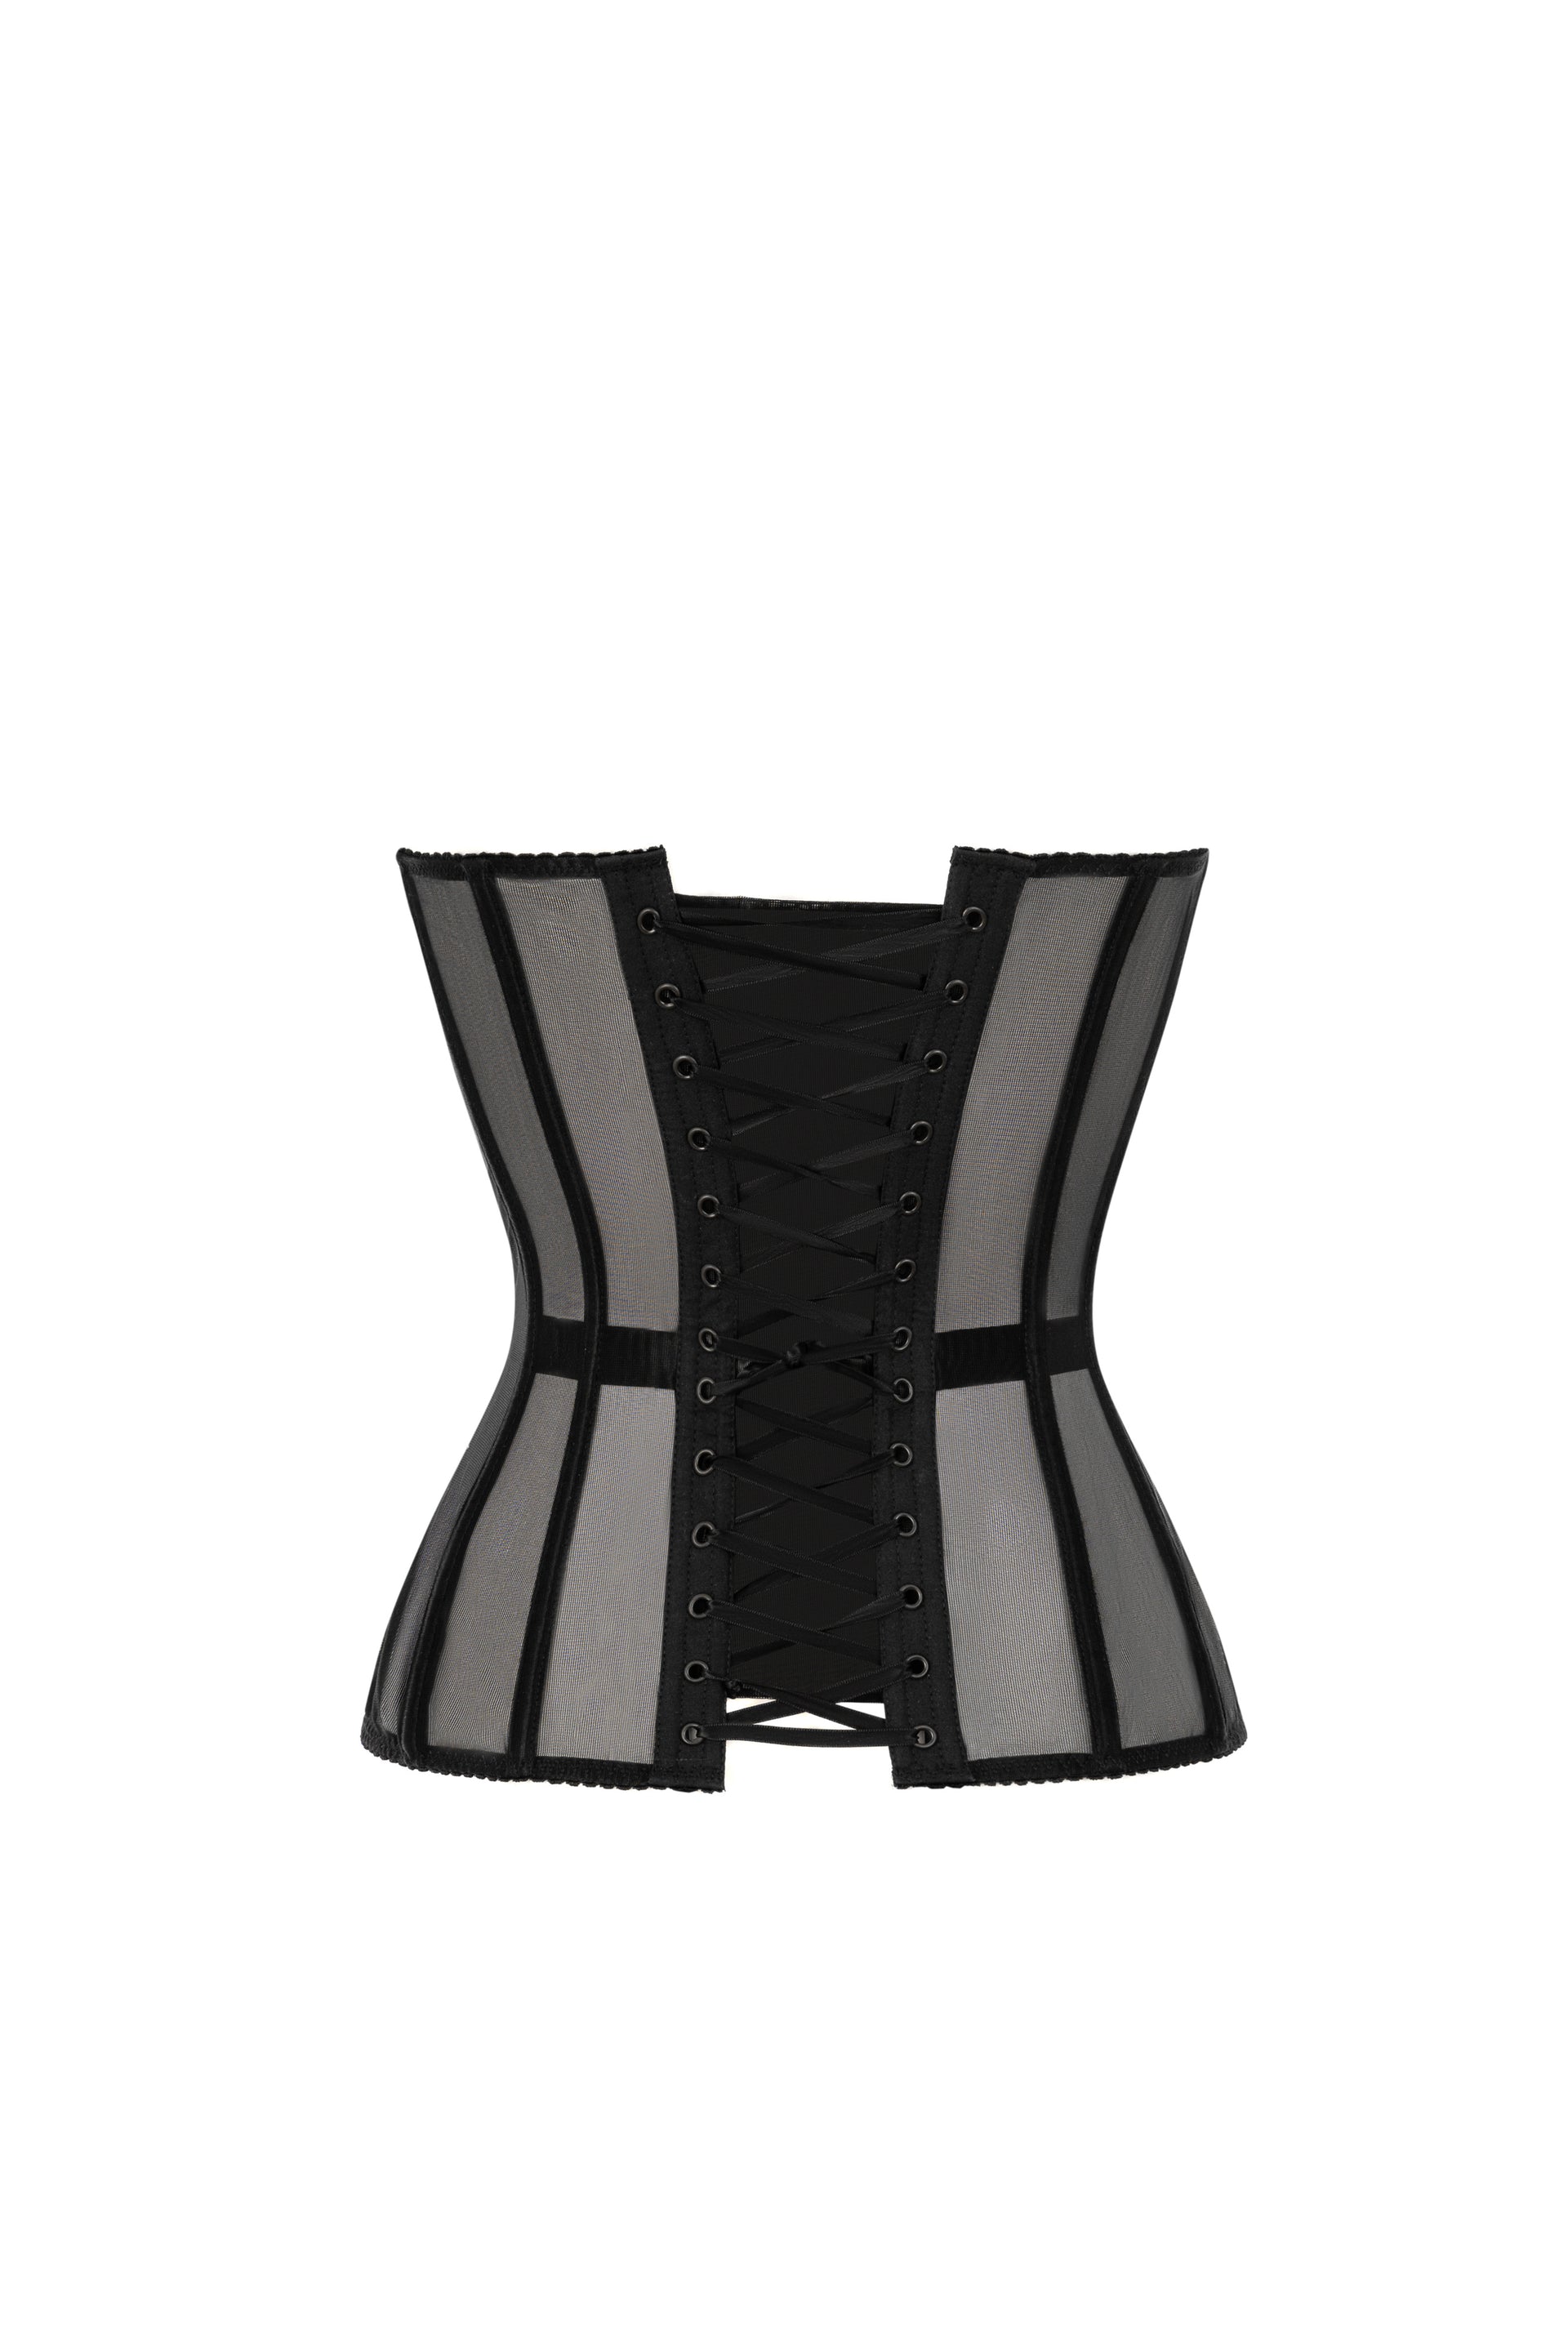 Black corset with cups